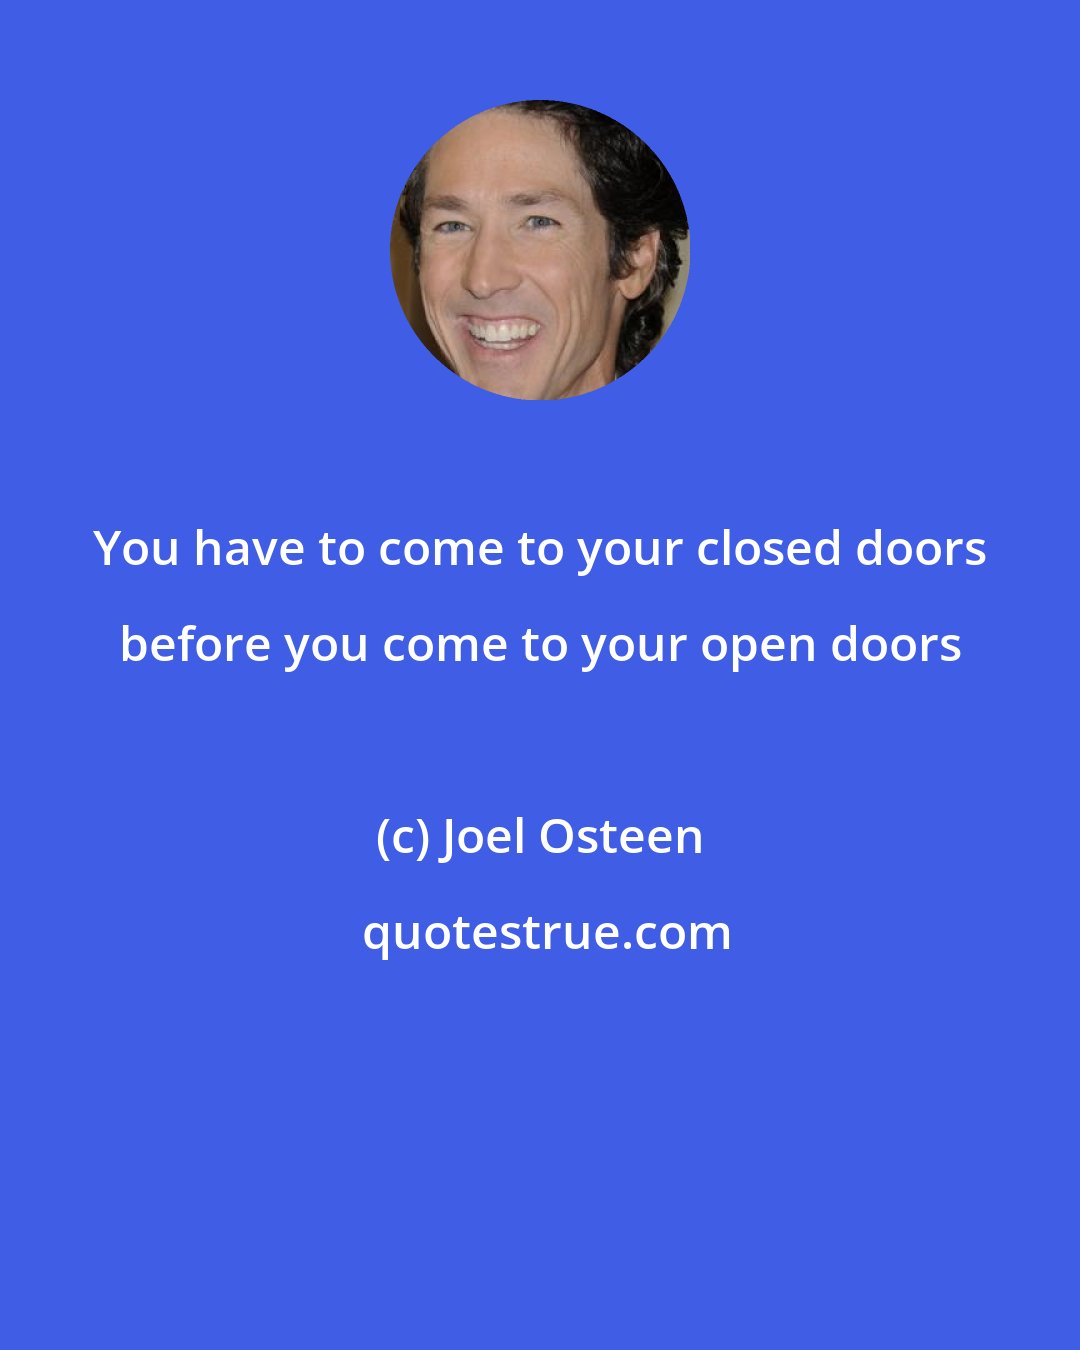 Joel Osteen: You have to come to your closed doors before you come to your open doors